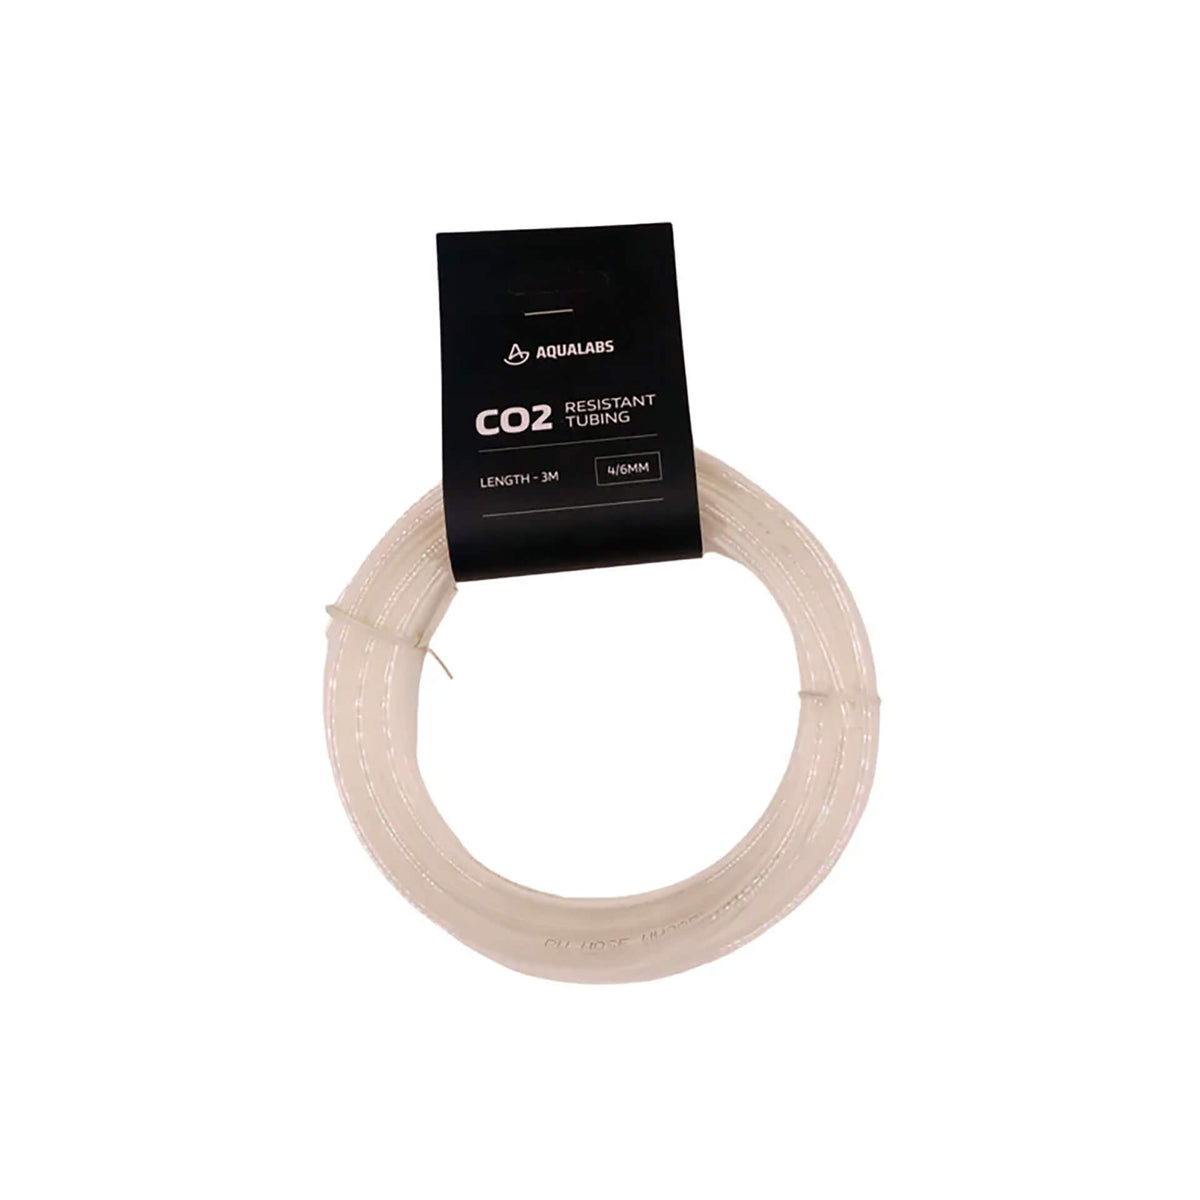 AquaLabs CO2 Resistant Tubing 3m - Clear